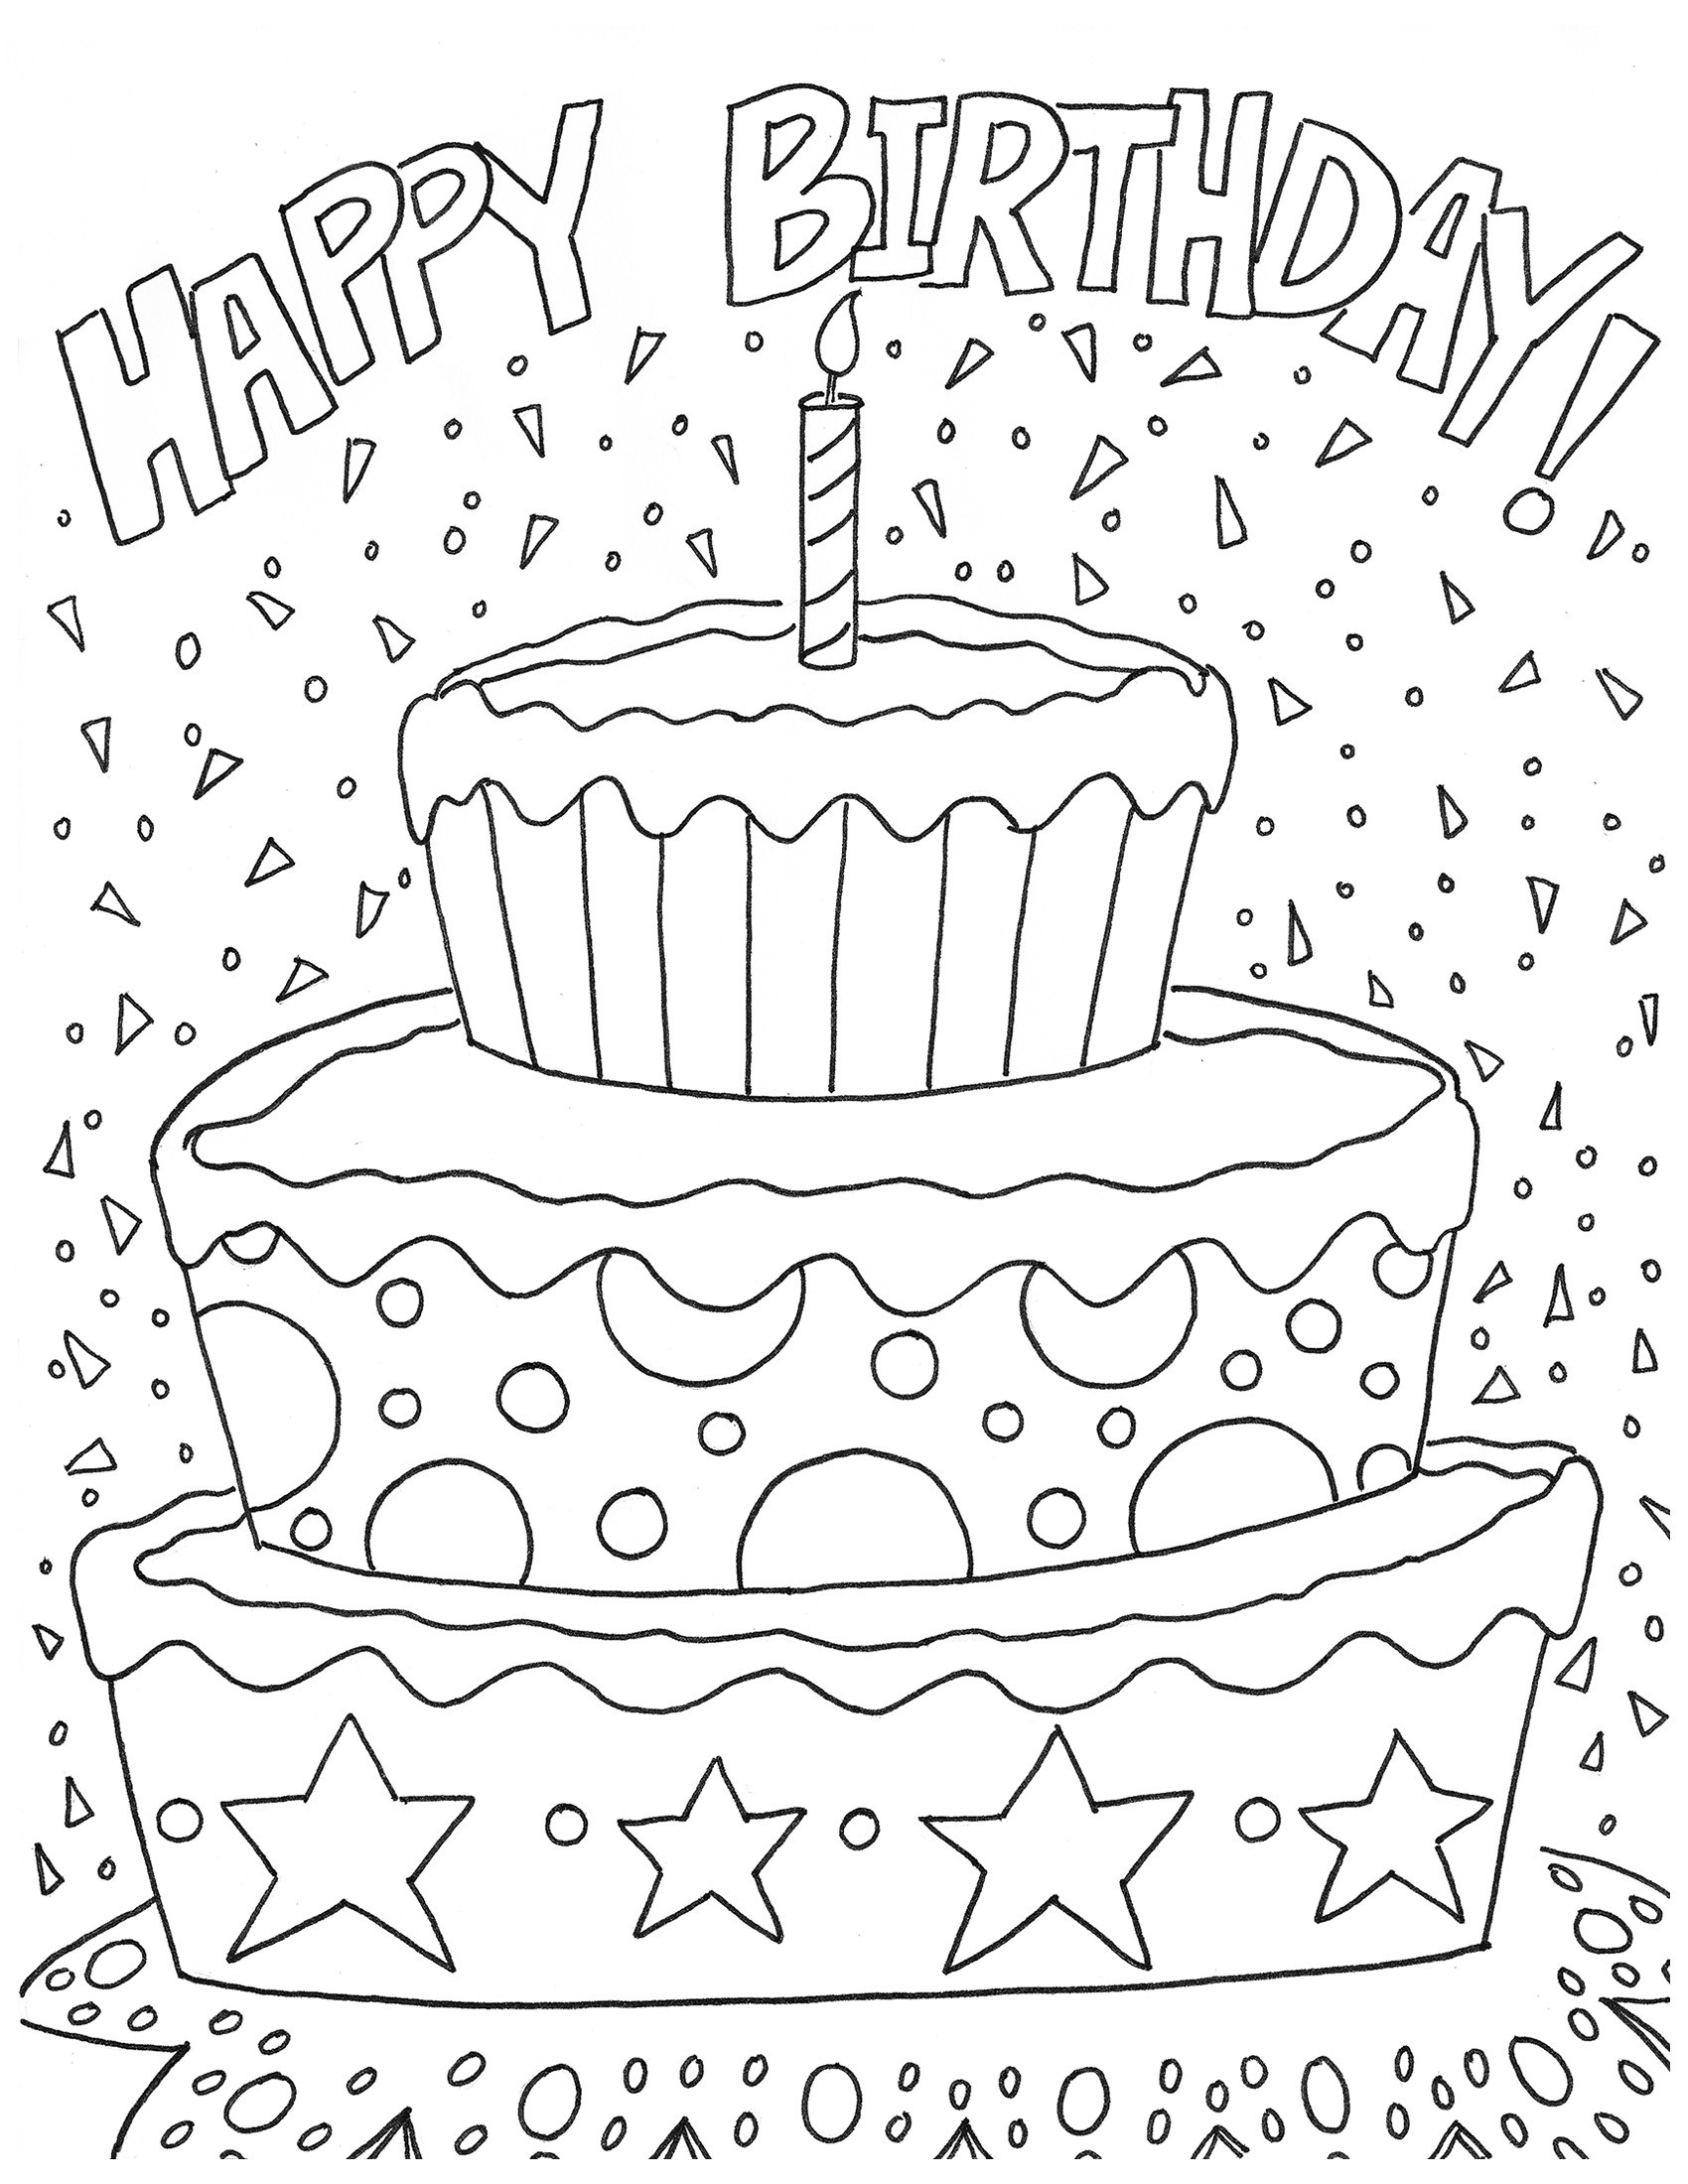 Birthday Boys Coloring Sheets
 Birthday Coloring Pages coloringsuite